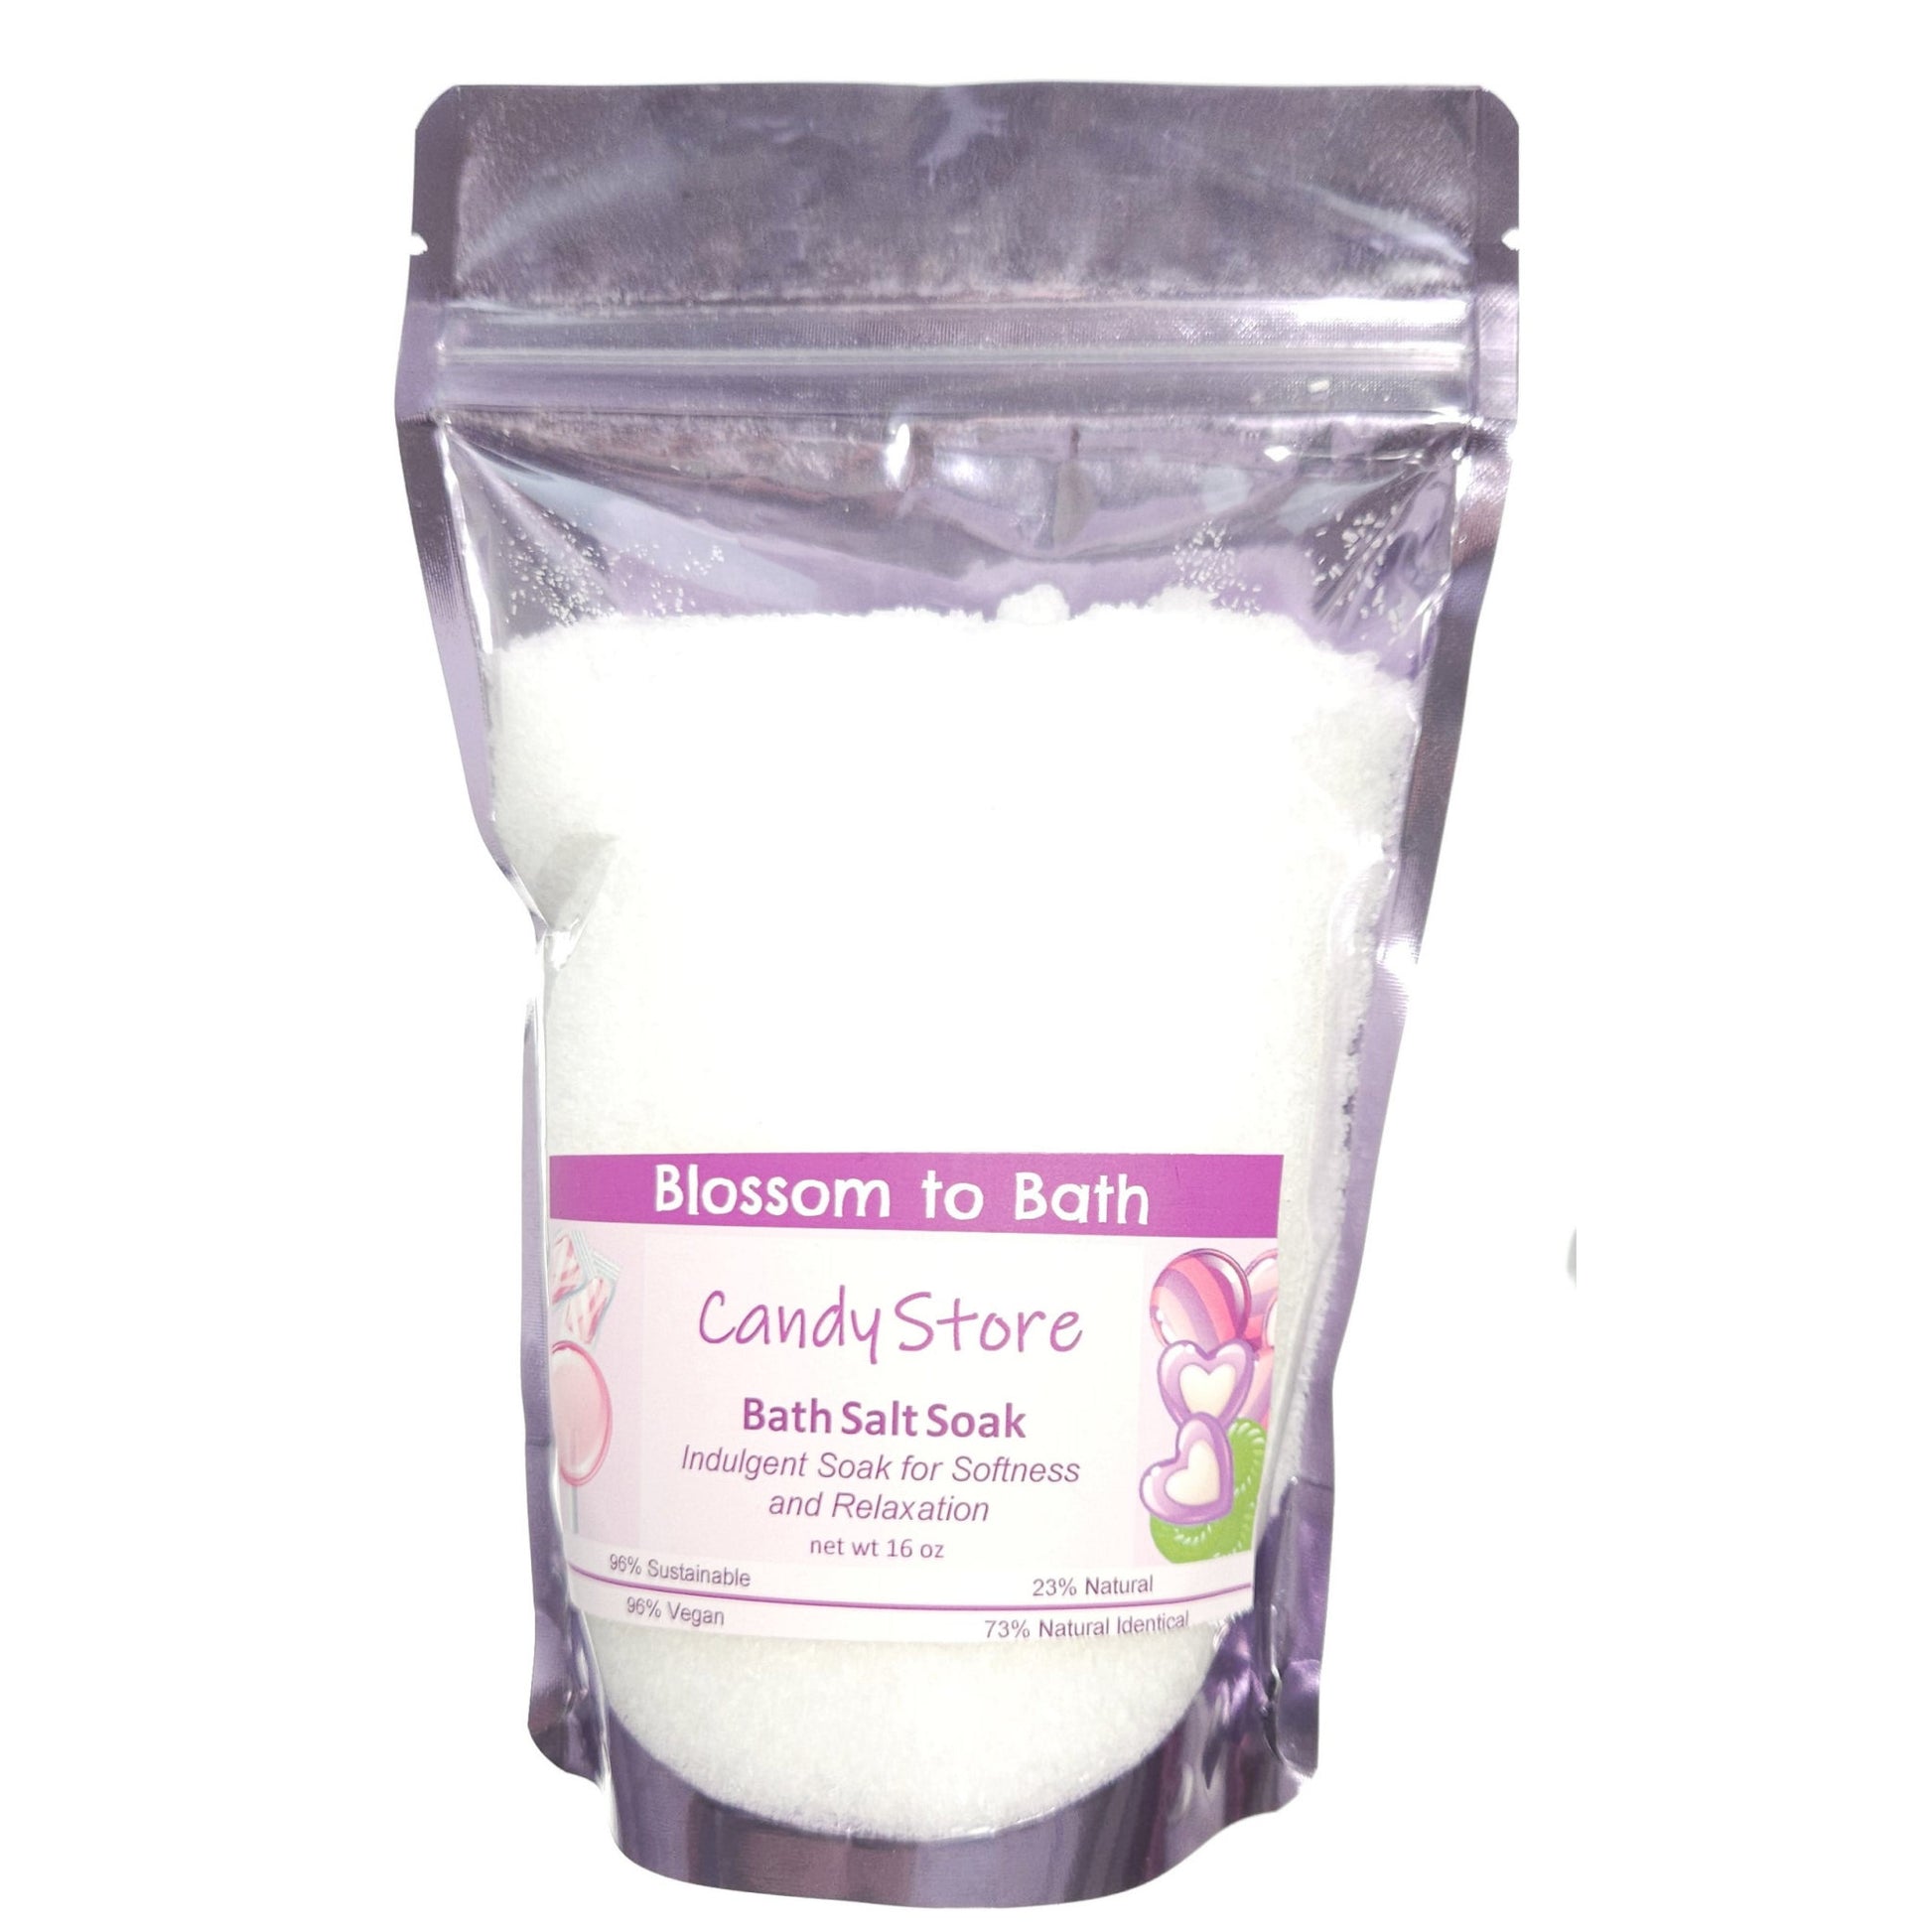 Buy Blossom to Bath Candy Store Bath Salt Soak from Flowersong Soap Studio.  Scented epsom salts for a luxurious soaking experience  A nostalgic fragrance has pops of sweet fruity bubbles on a bed of spun sugar and vanilla bean.